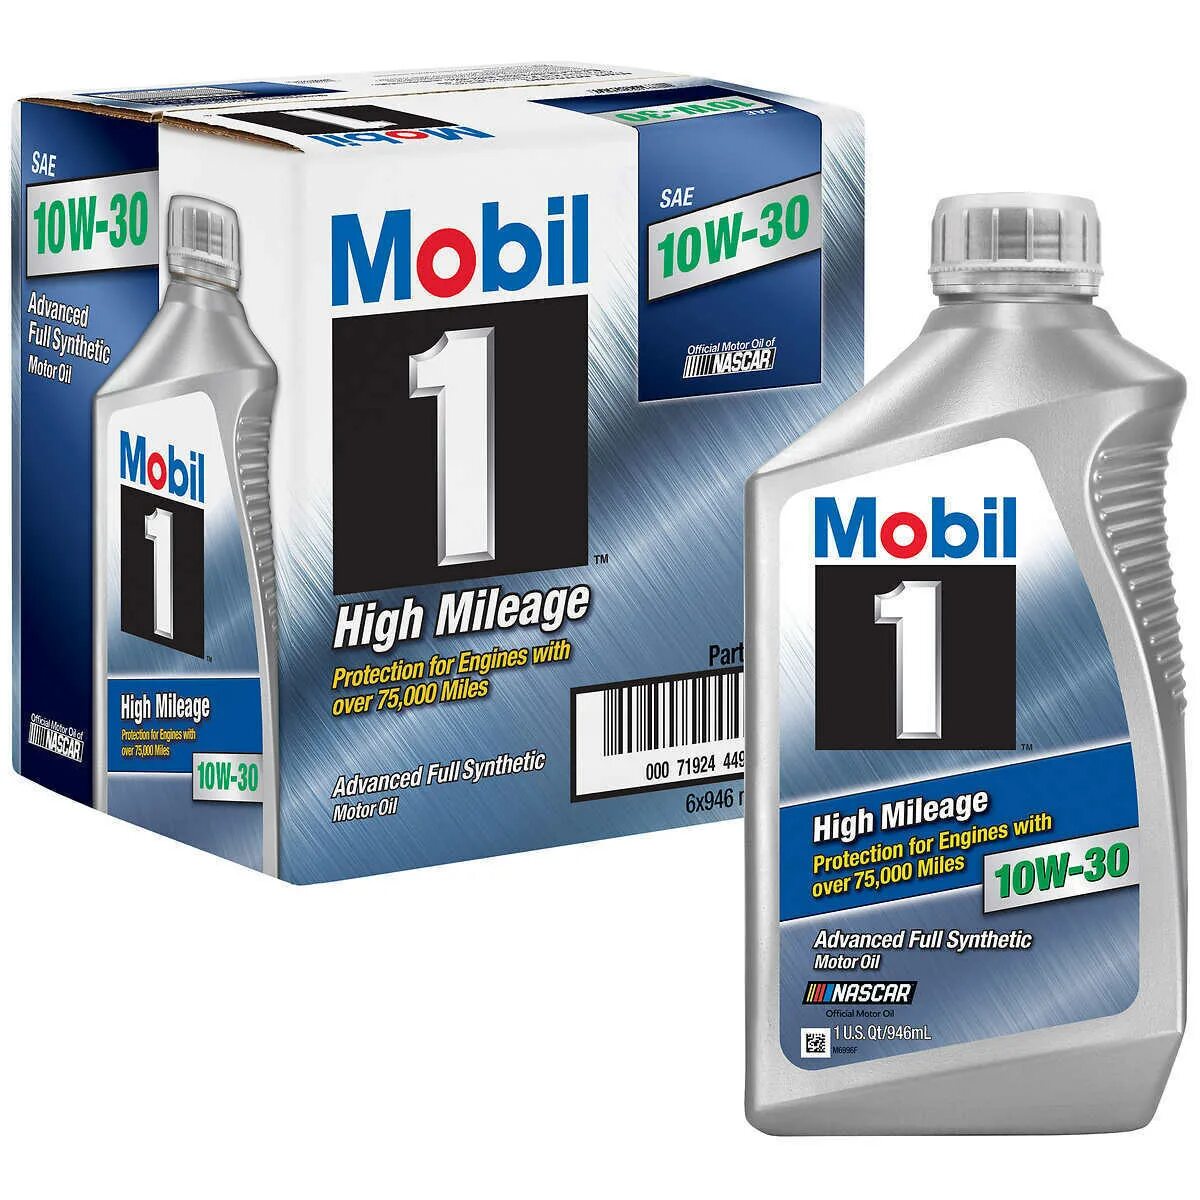 Mobil 1 x1 масло. 5w-30 mobil1 High Mileage. Mobil 1 Full Synthetic 0w40 Truck & SUV. 123875 Mobil 1 ESP Formula 0w-40*. Mobil 1 ESP 0w-30.